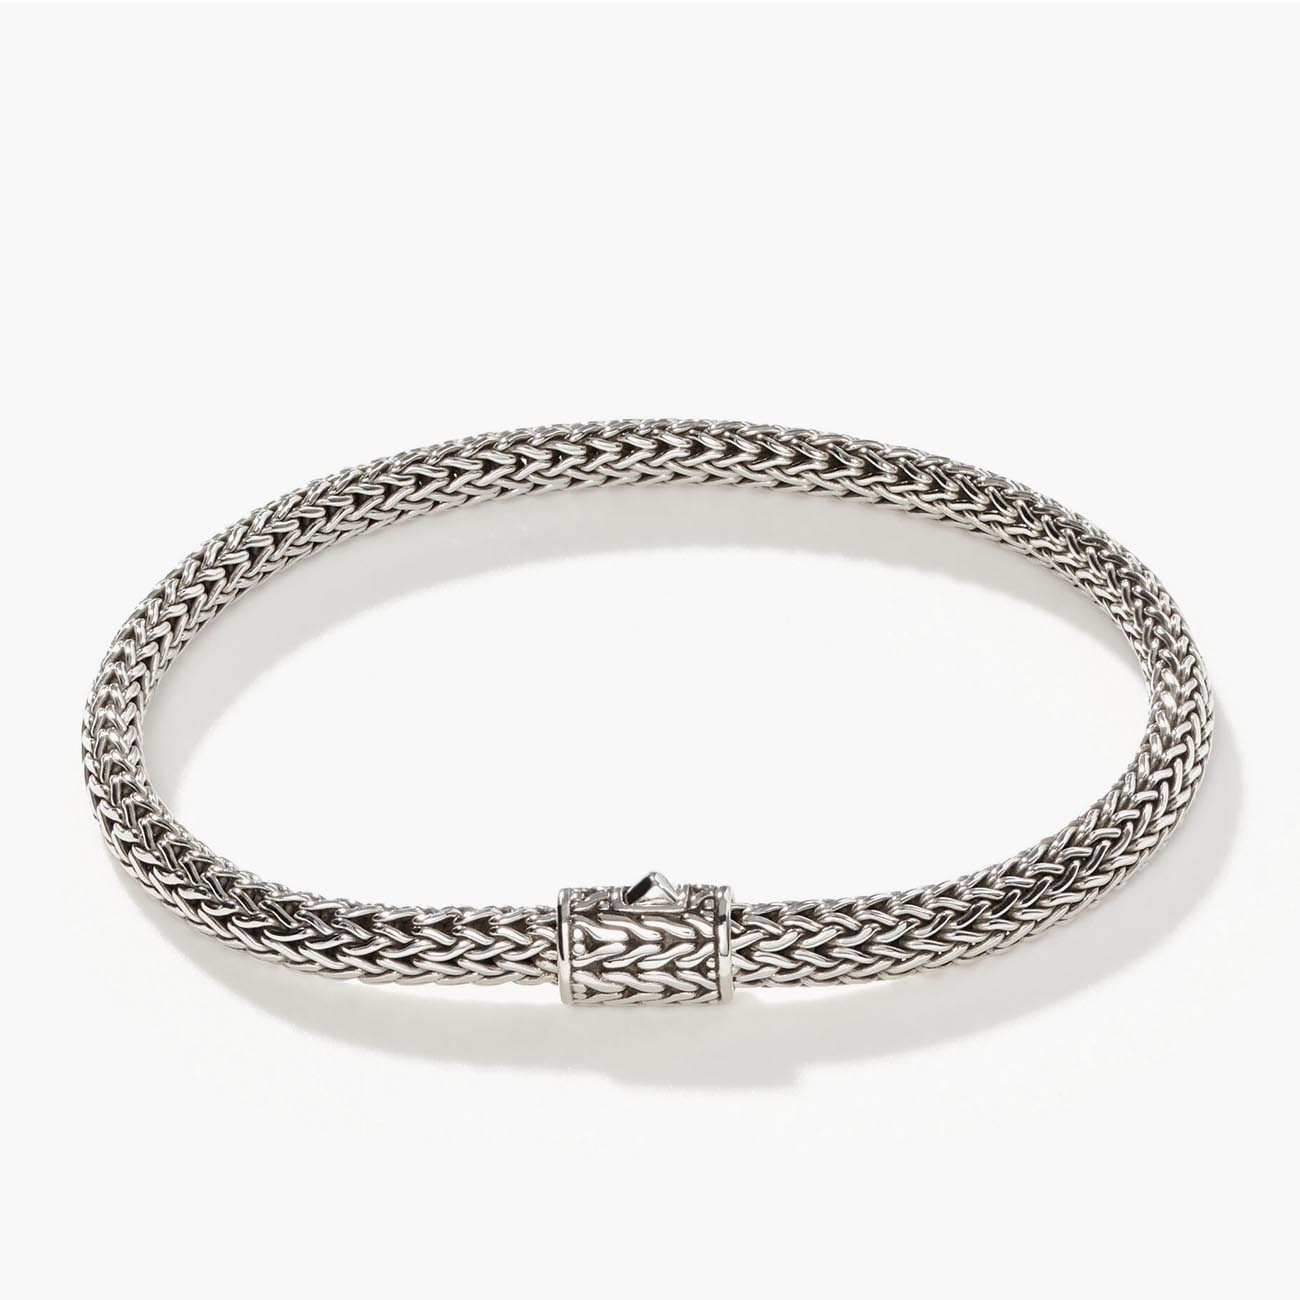 John Hardy Classic Chain 5mm Silver Bracelet with Chain Clasp